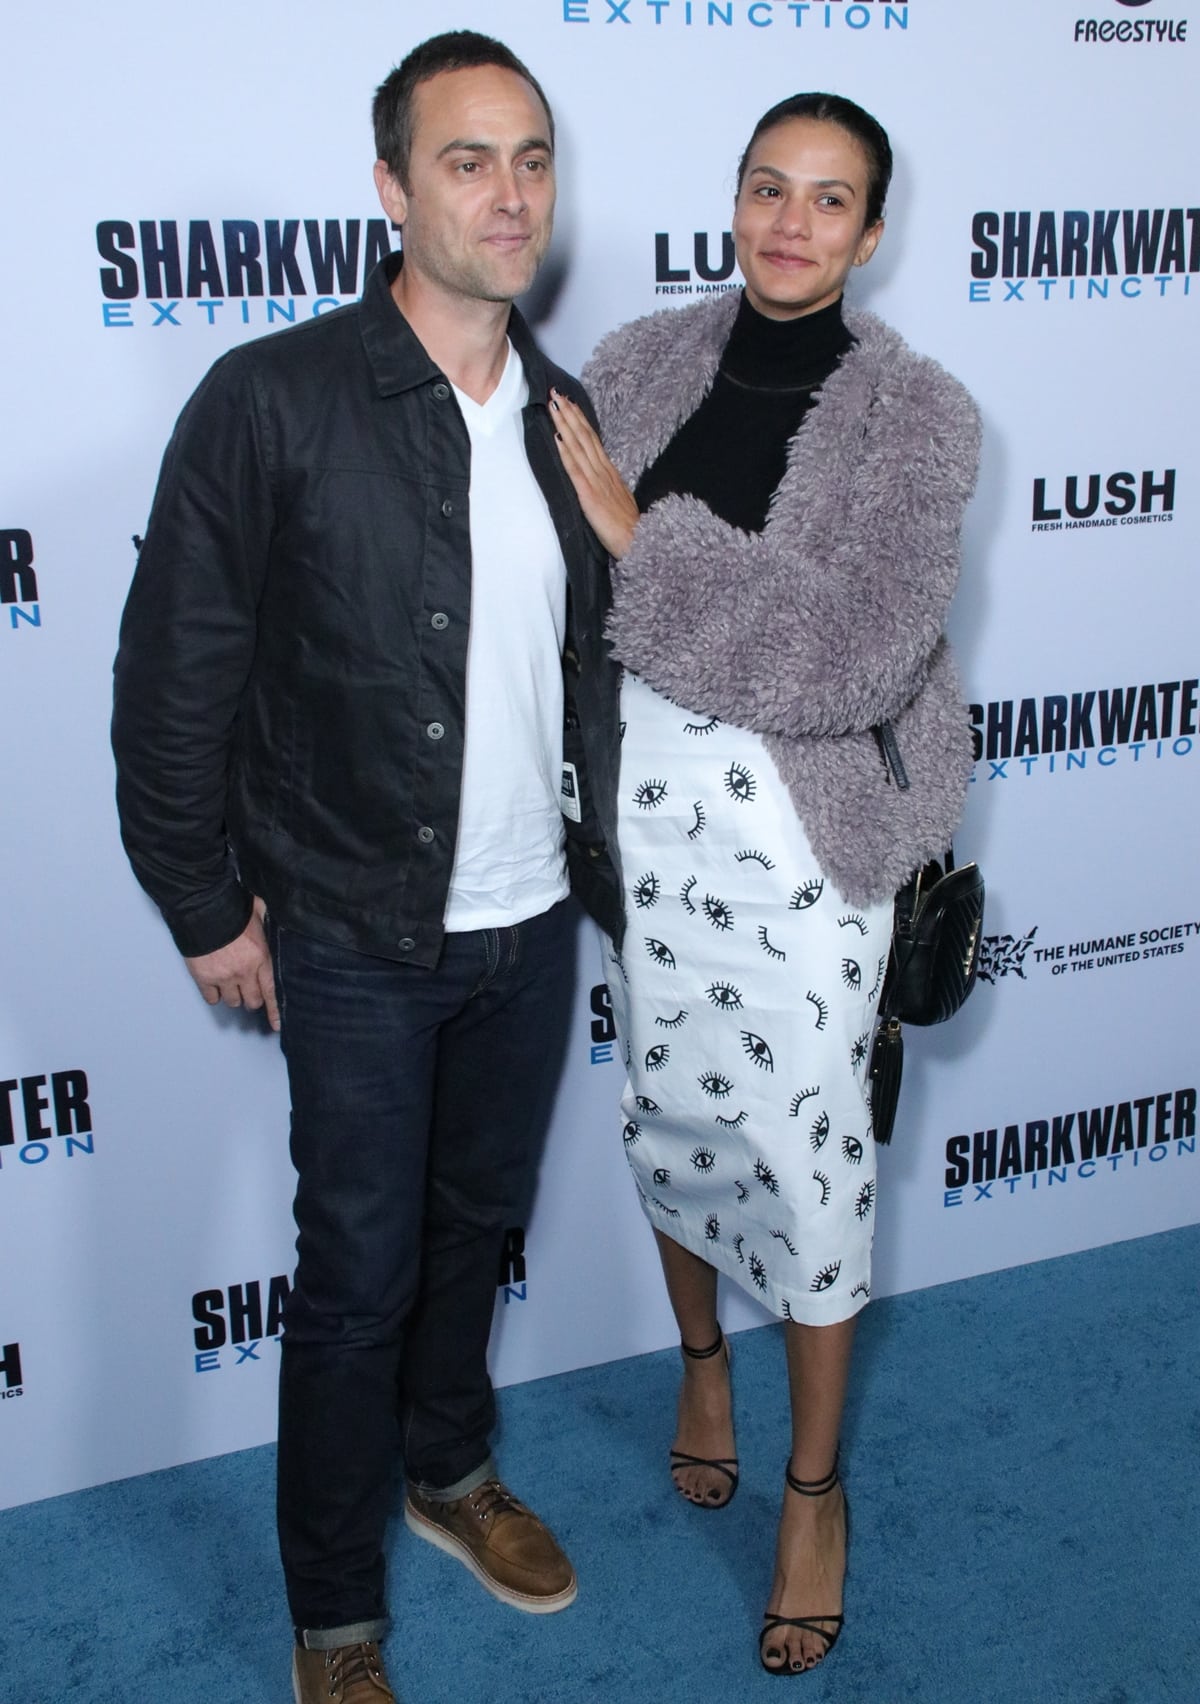 Stuart Townsend with his wife Agatha Araya at a screening of Freestyle Releasing's "Sharkwater Extinction"